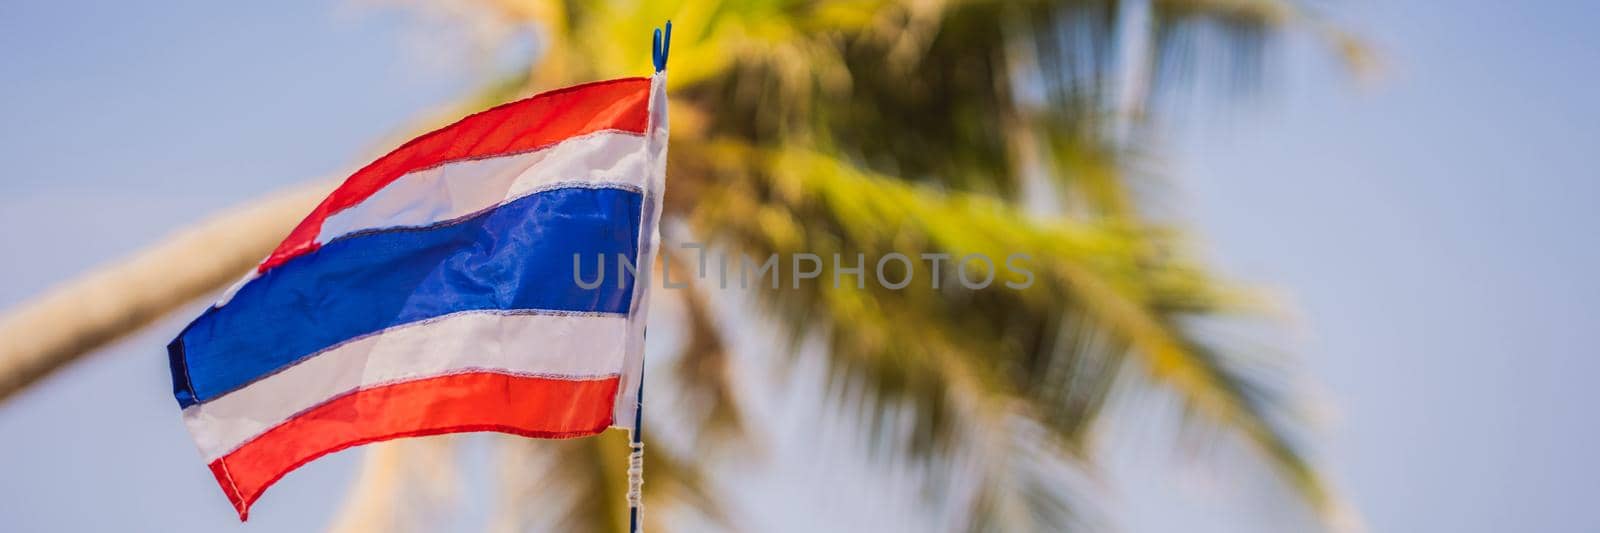 Waving Thailand flag in the sunny blue sky with summer beach background. Vacation theme, holiday concept BANNER, LONG FORMAT by galitskaya